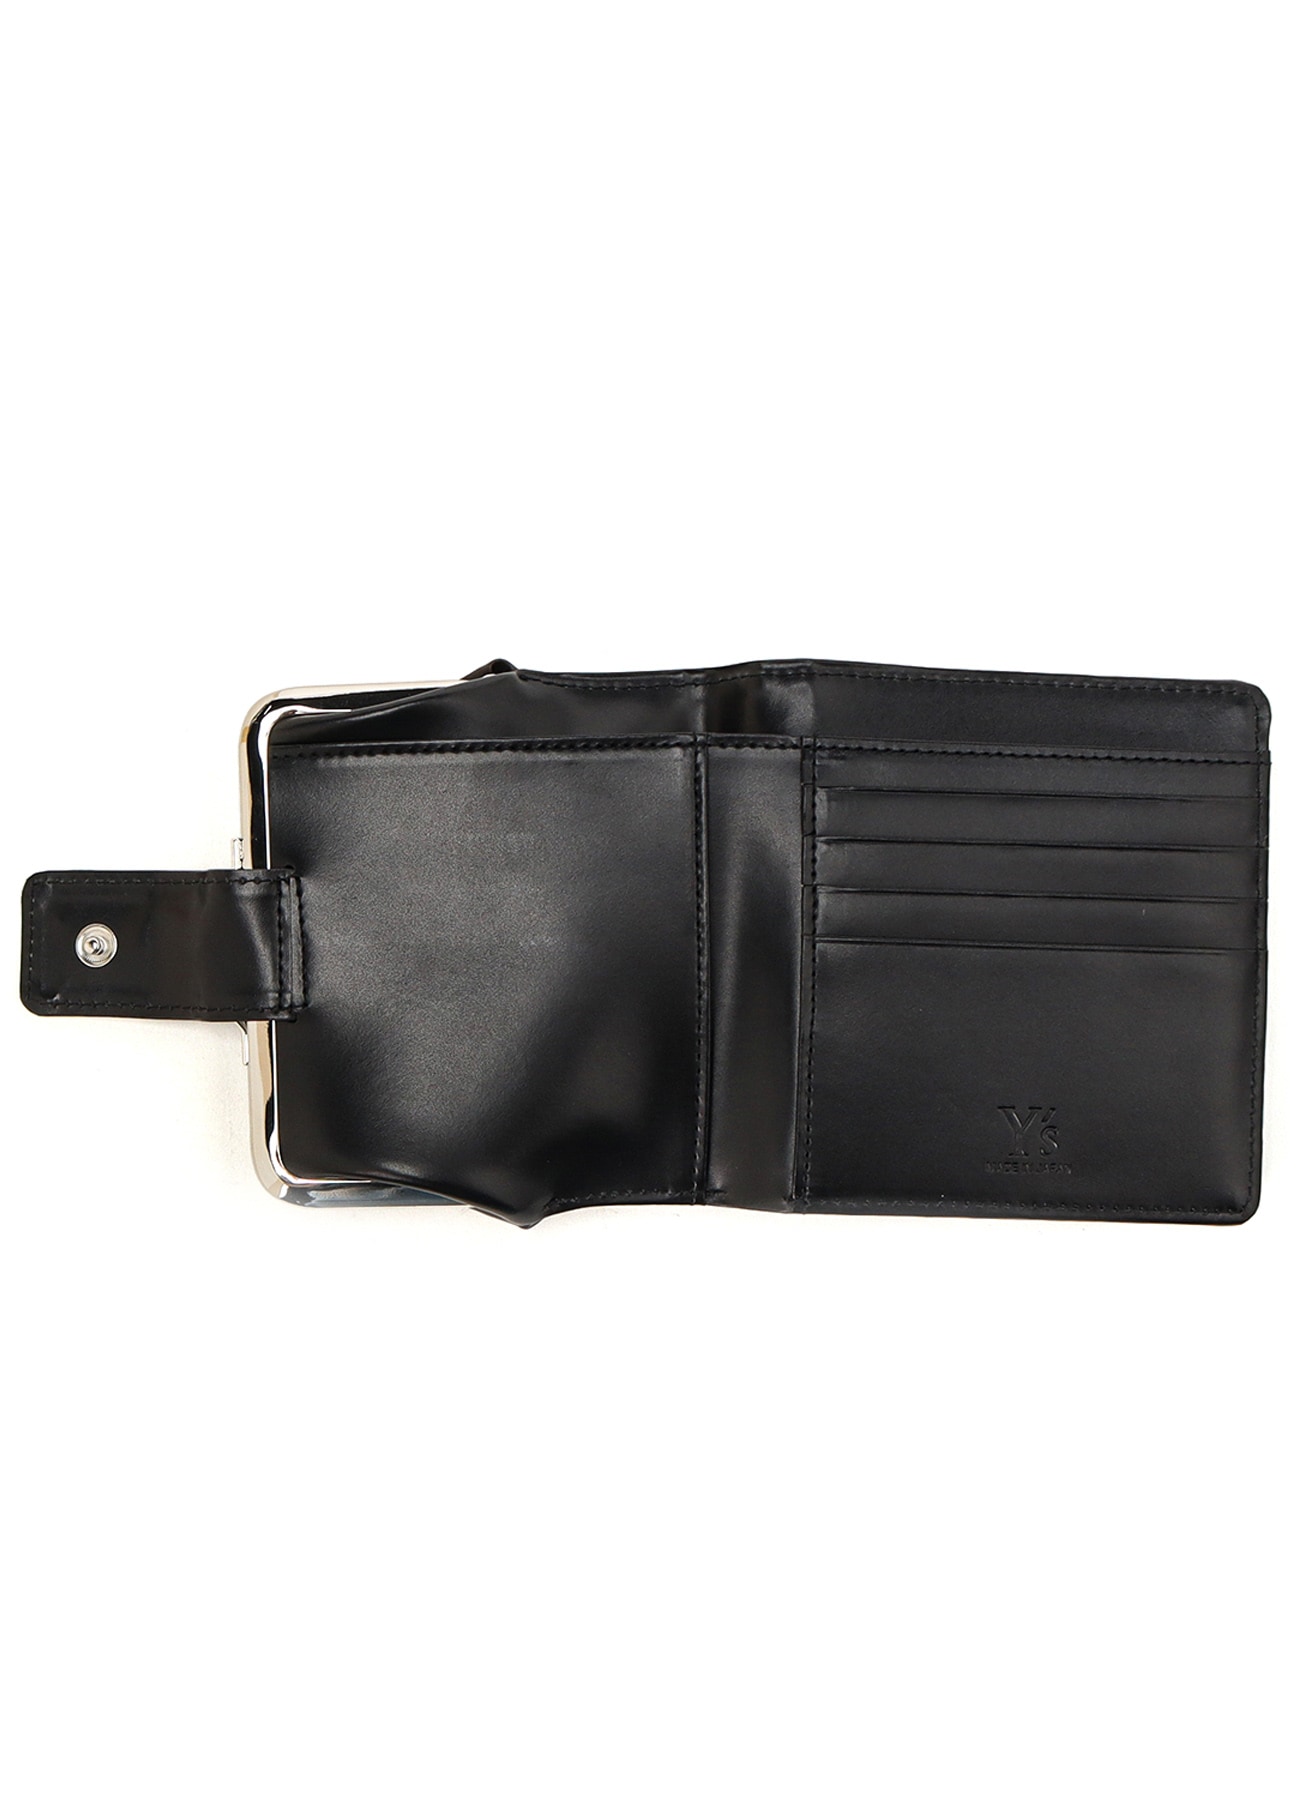 【7/26 12:00 Release】ADVANTIC LEATHER SMALL WALLET